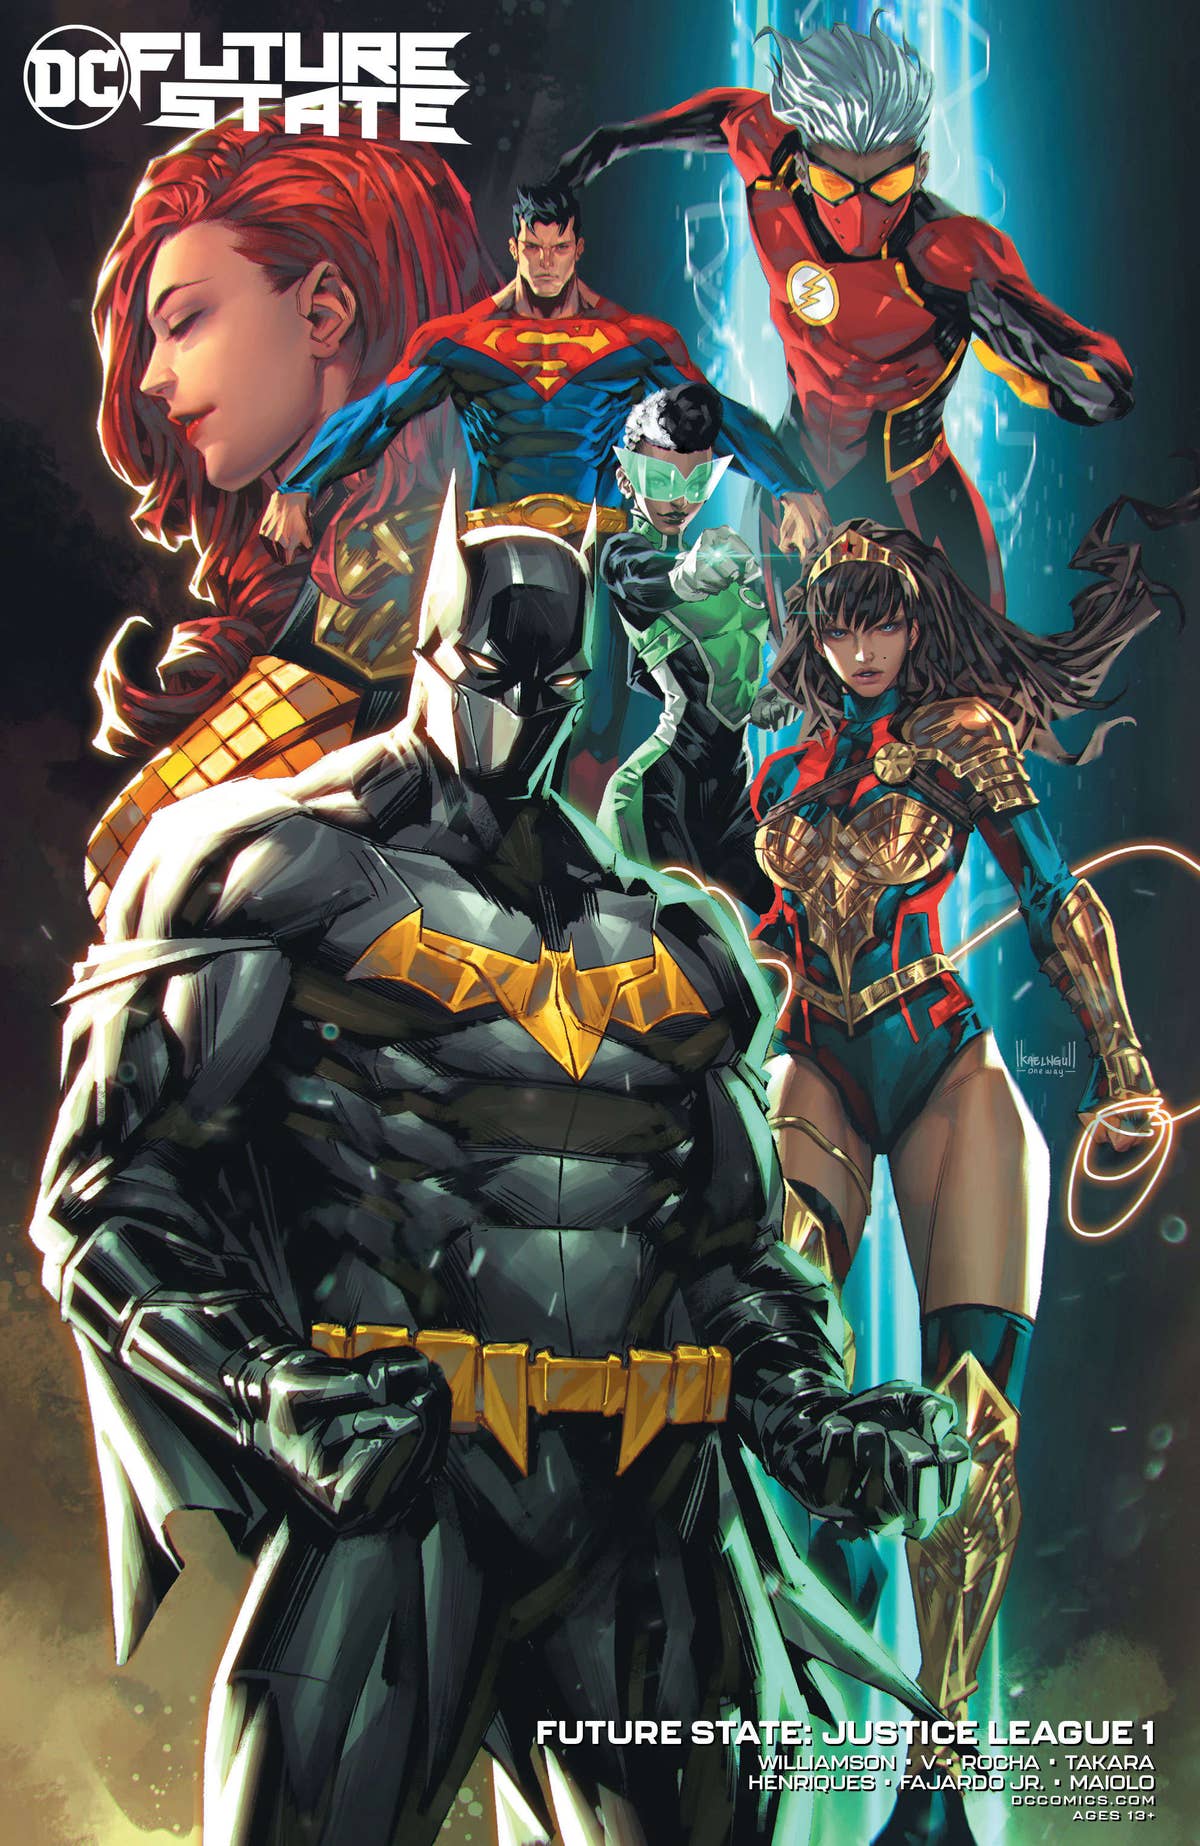 The Future State Justice League  each pose heroically on the first issue variant cover. Art by Kael Ngu.